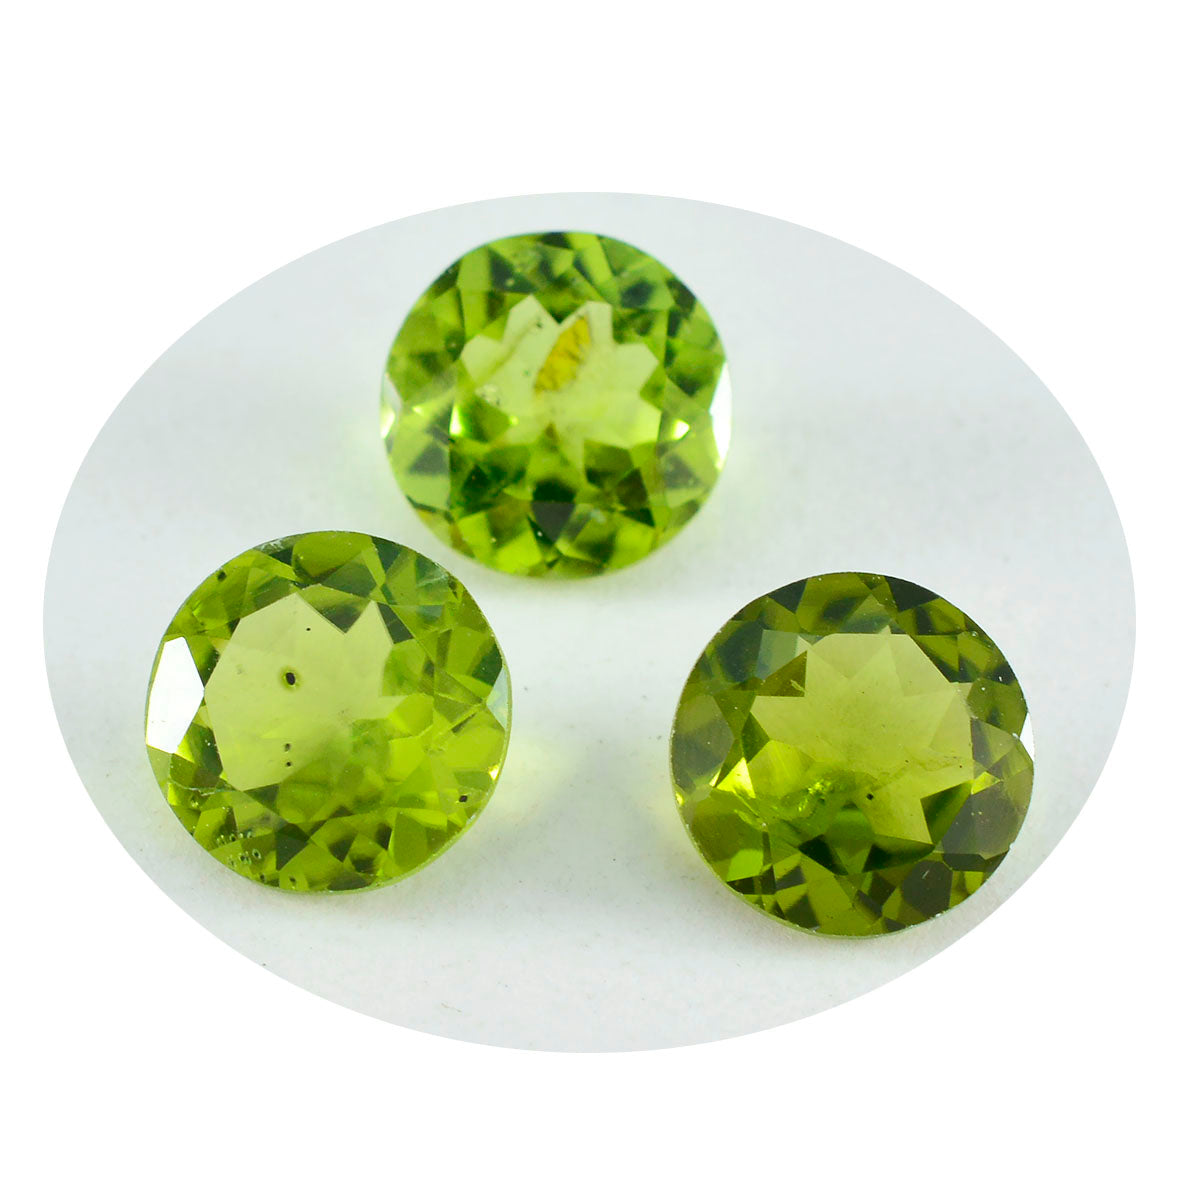 Riyogems 1PC Real Green Peridot Faceted 12x12 mm Round Shape Nice Quality Gems